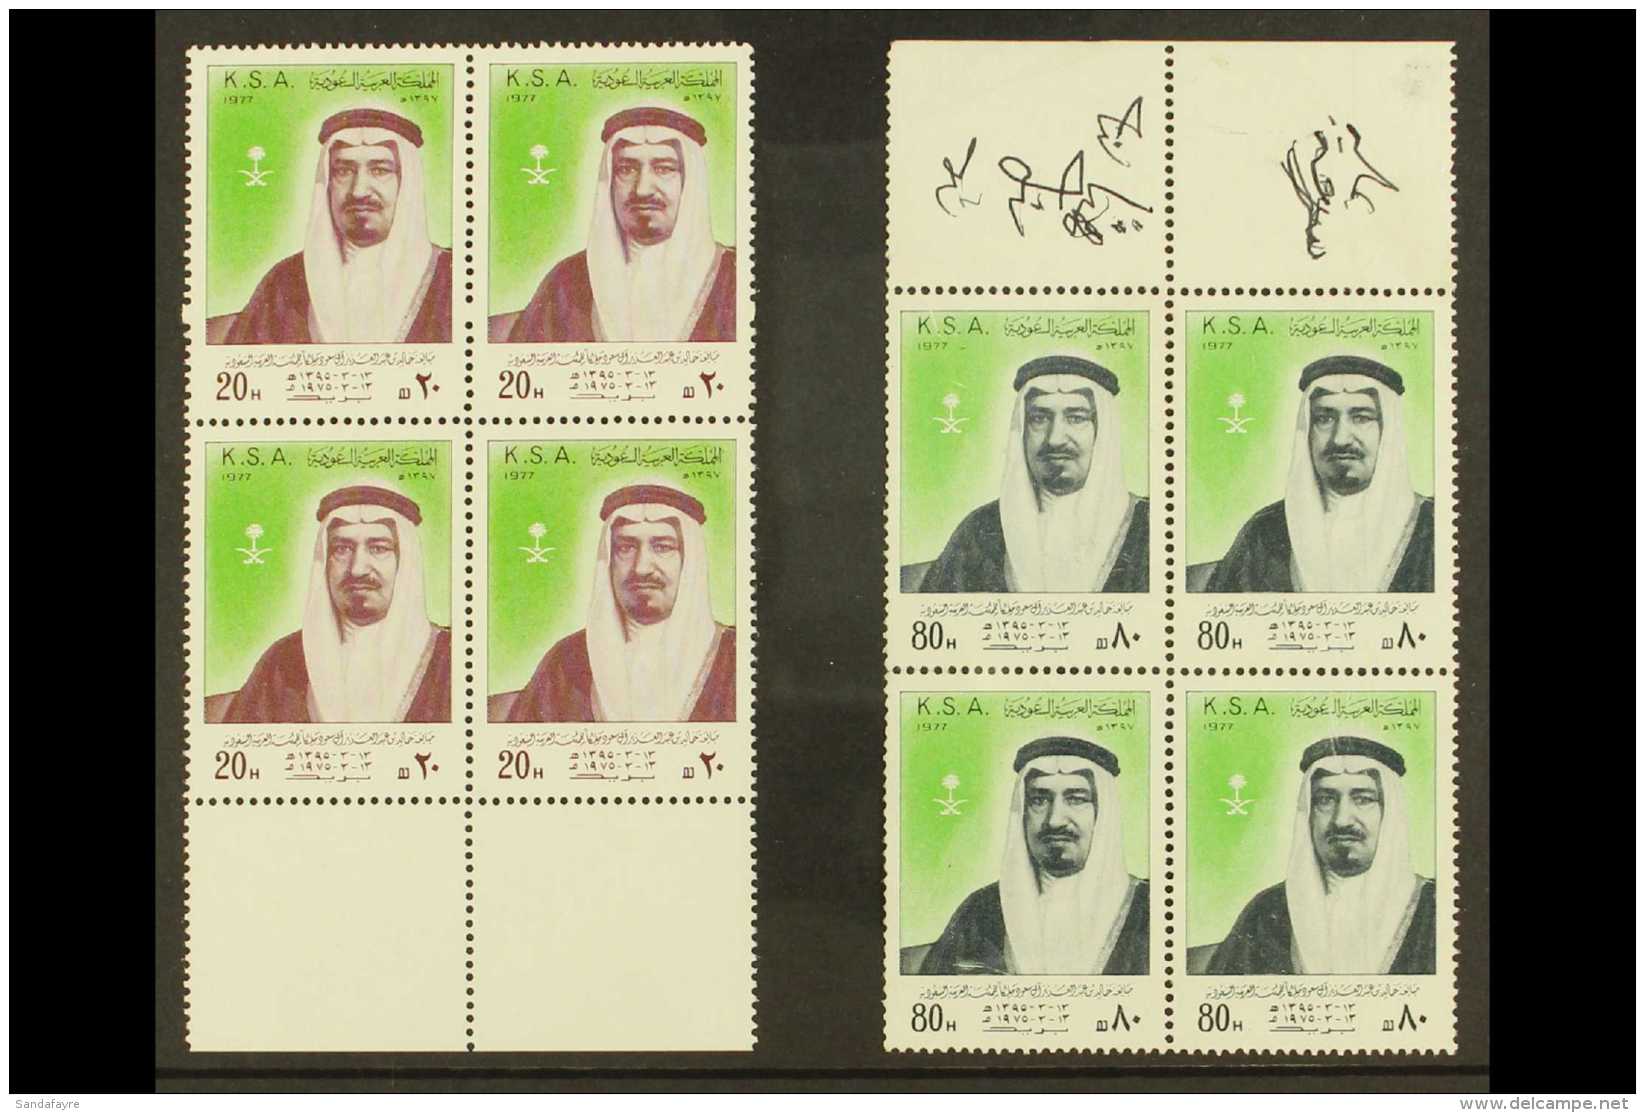 1977 20h And 80h 2nd Anniv With ERROR OF DATES, SG 1197/1198, With Each As Never Hinged Mint Marginal Blocks Of... - Saoedi-Arabië